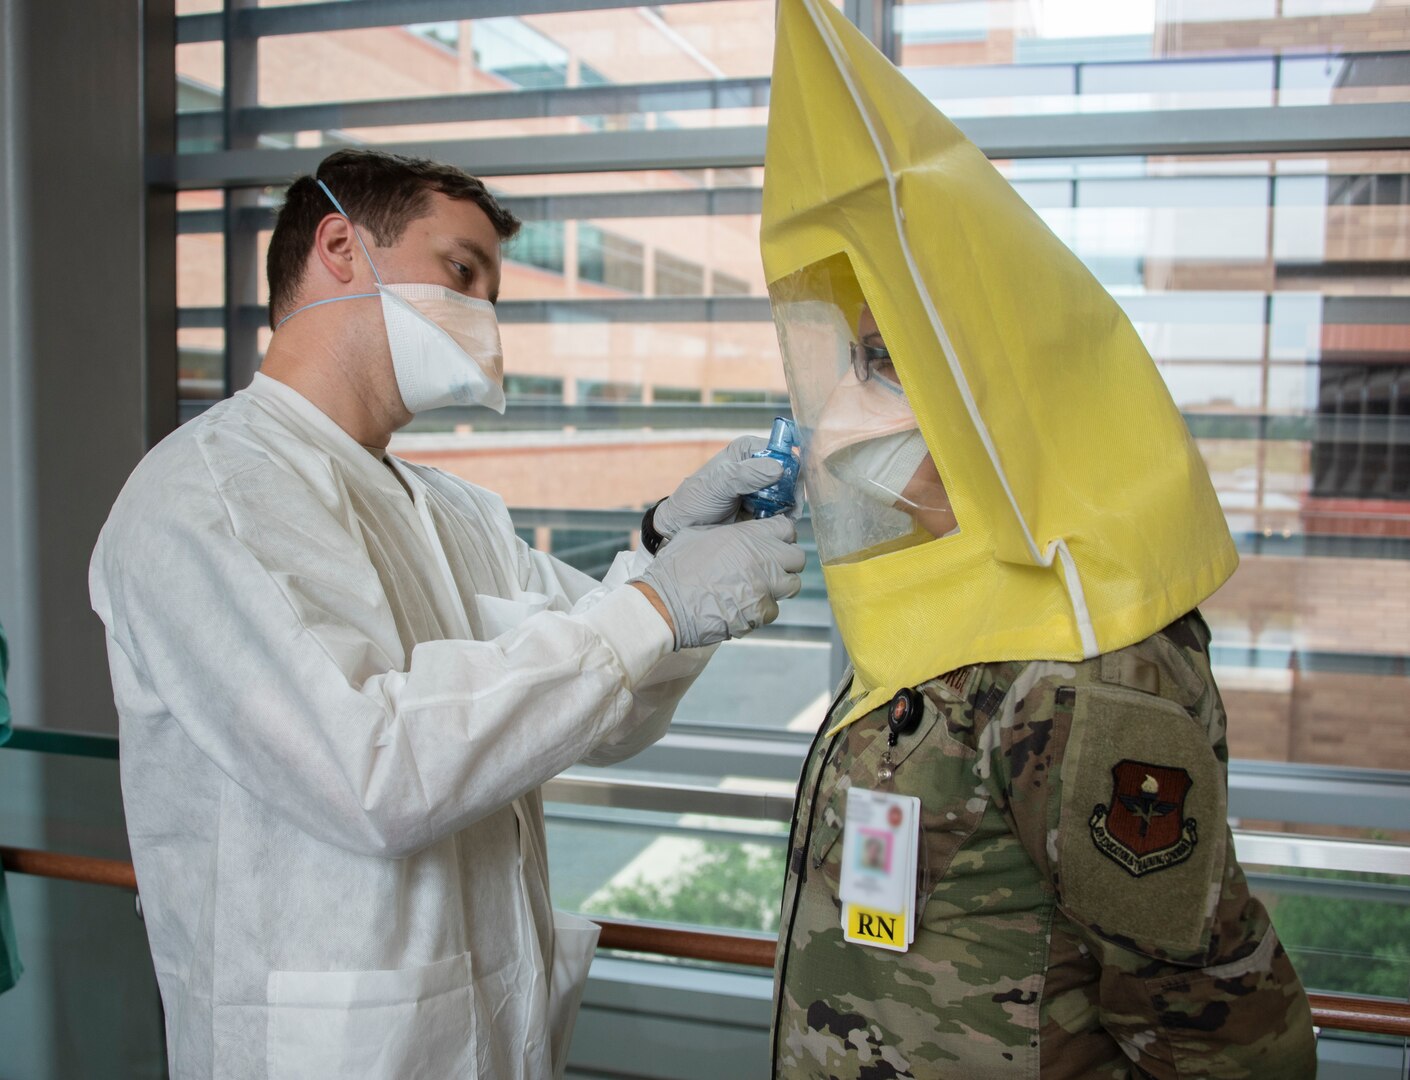 A soldier conducts a respirator fit test for an airman.